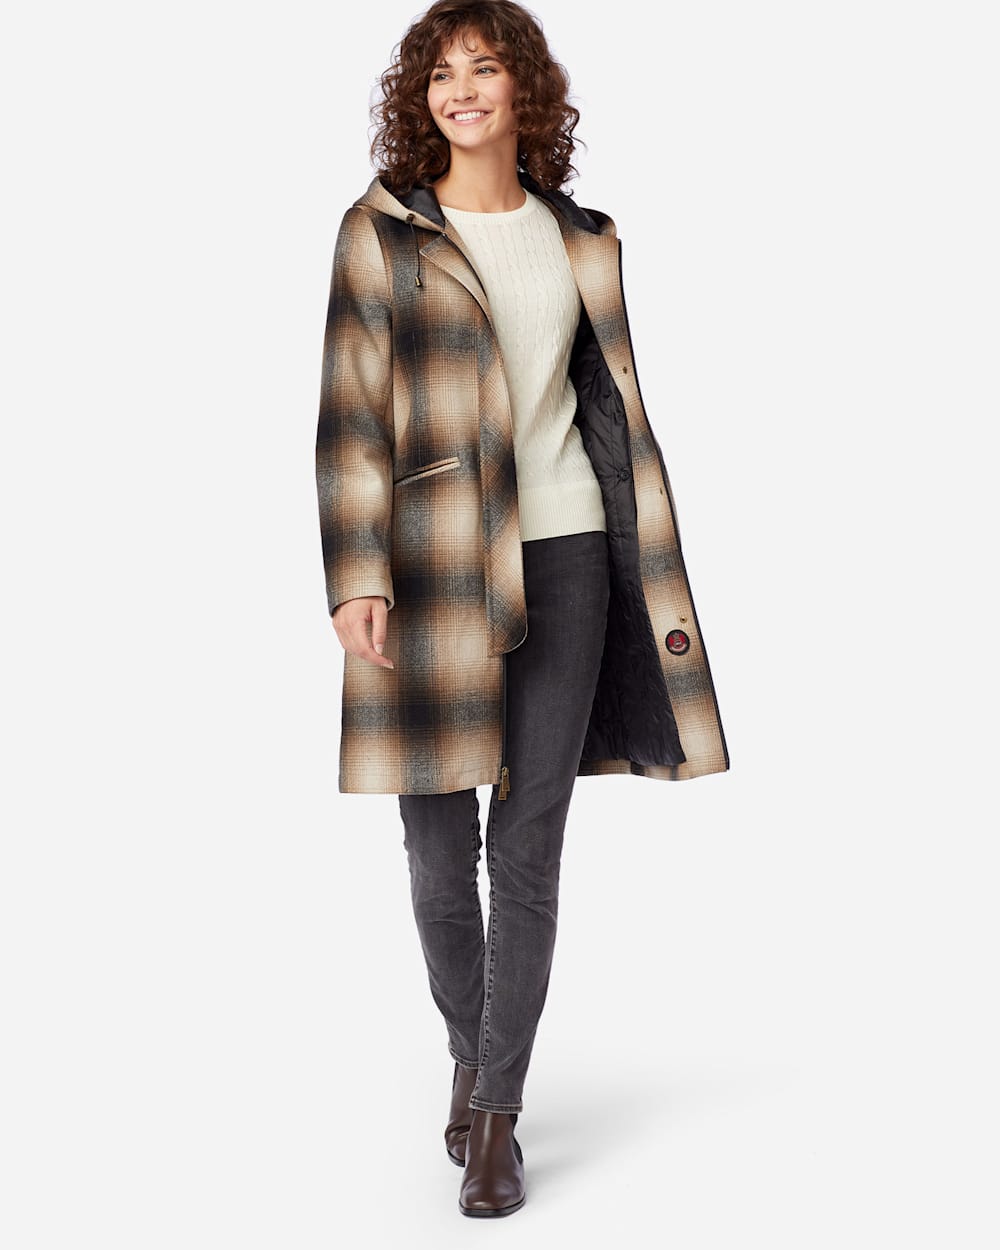 ALTERNATE VIEW OF WOMEN'S STANFORD INSULATED WALKER COAT IN IVORY/BLACK/MOCHA PLAID image number 2